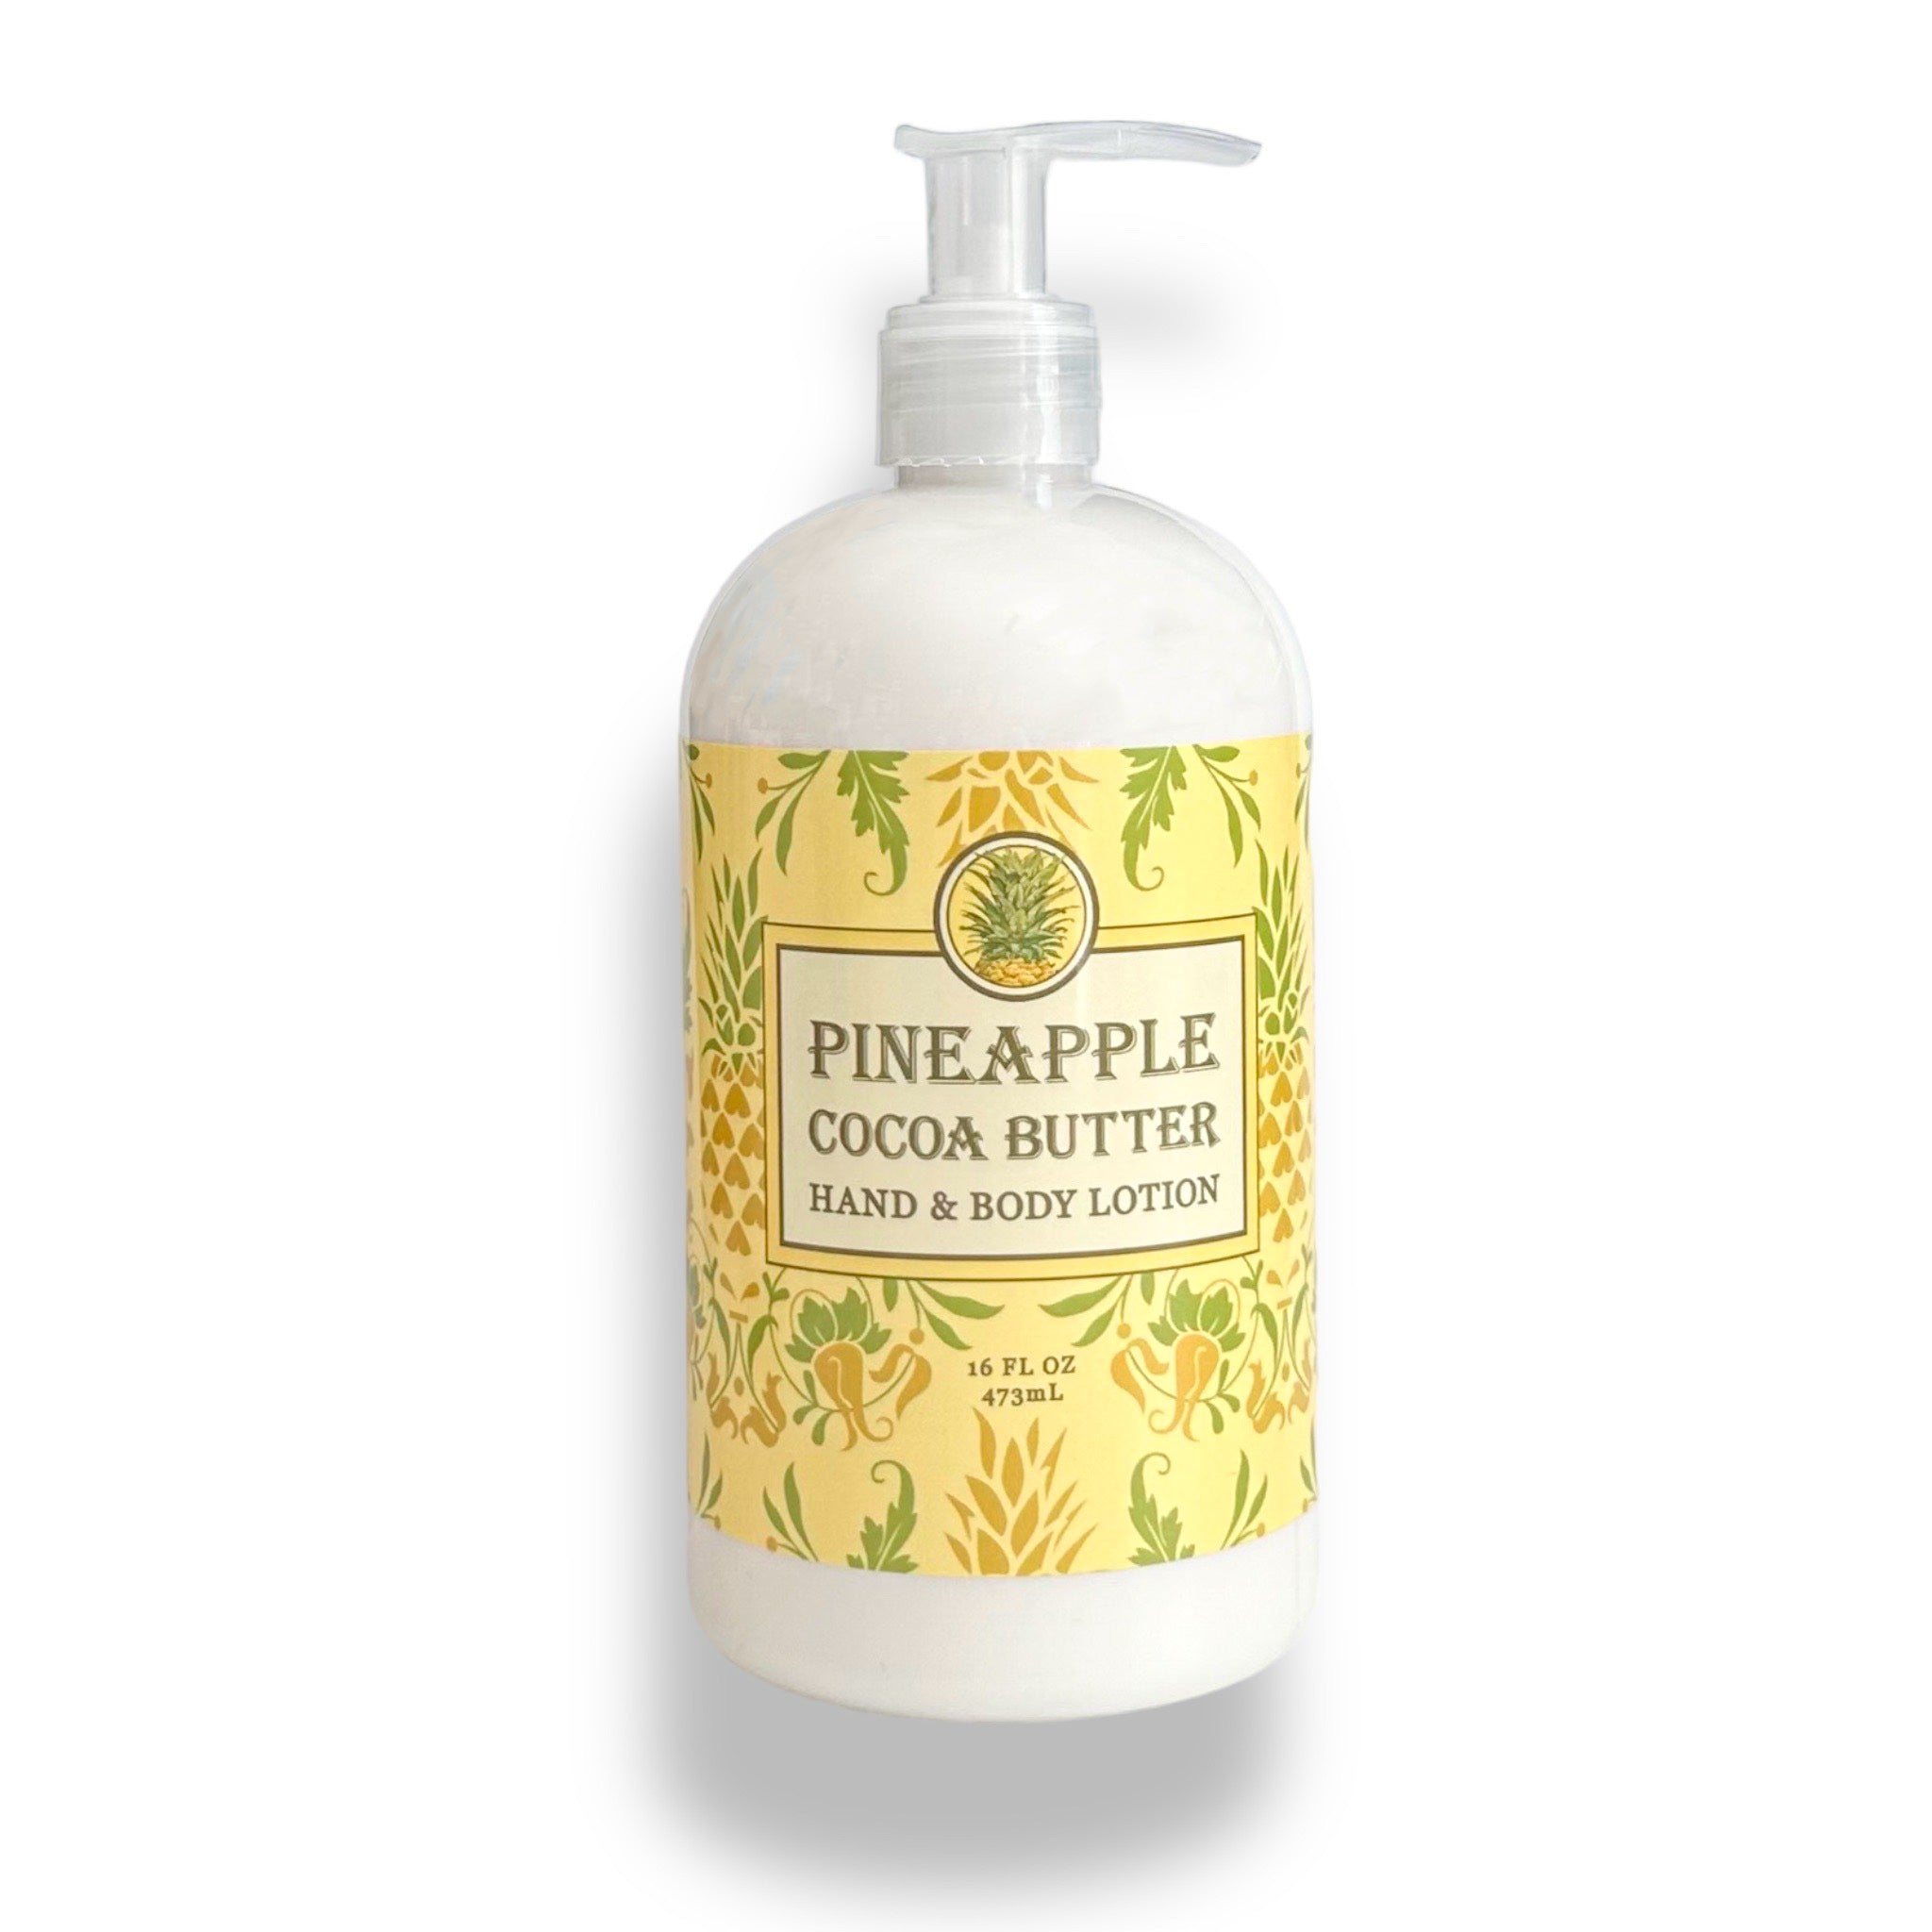 Greenwich Bay Taading Company Pineapple Cocoa Butter Collection Lotion